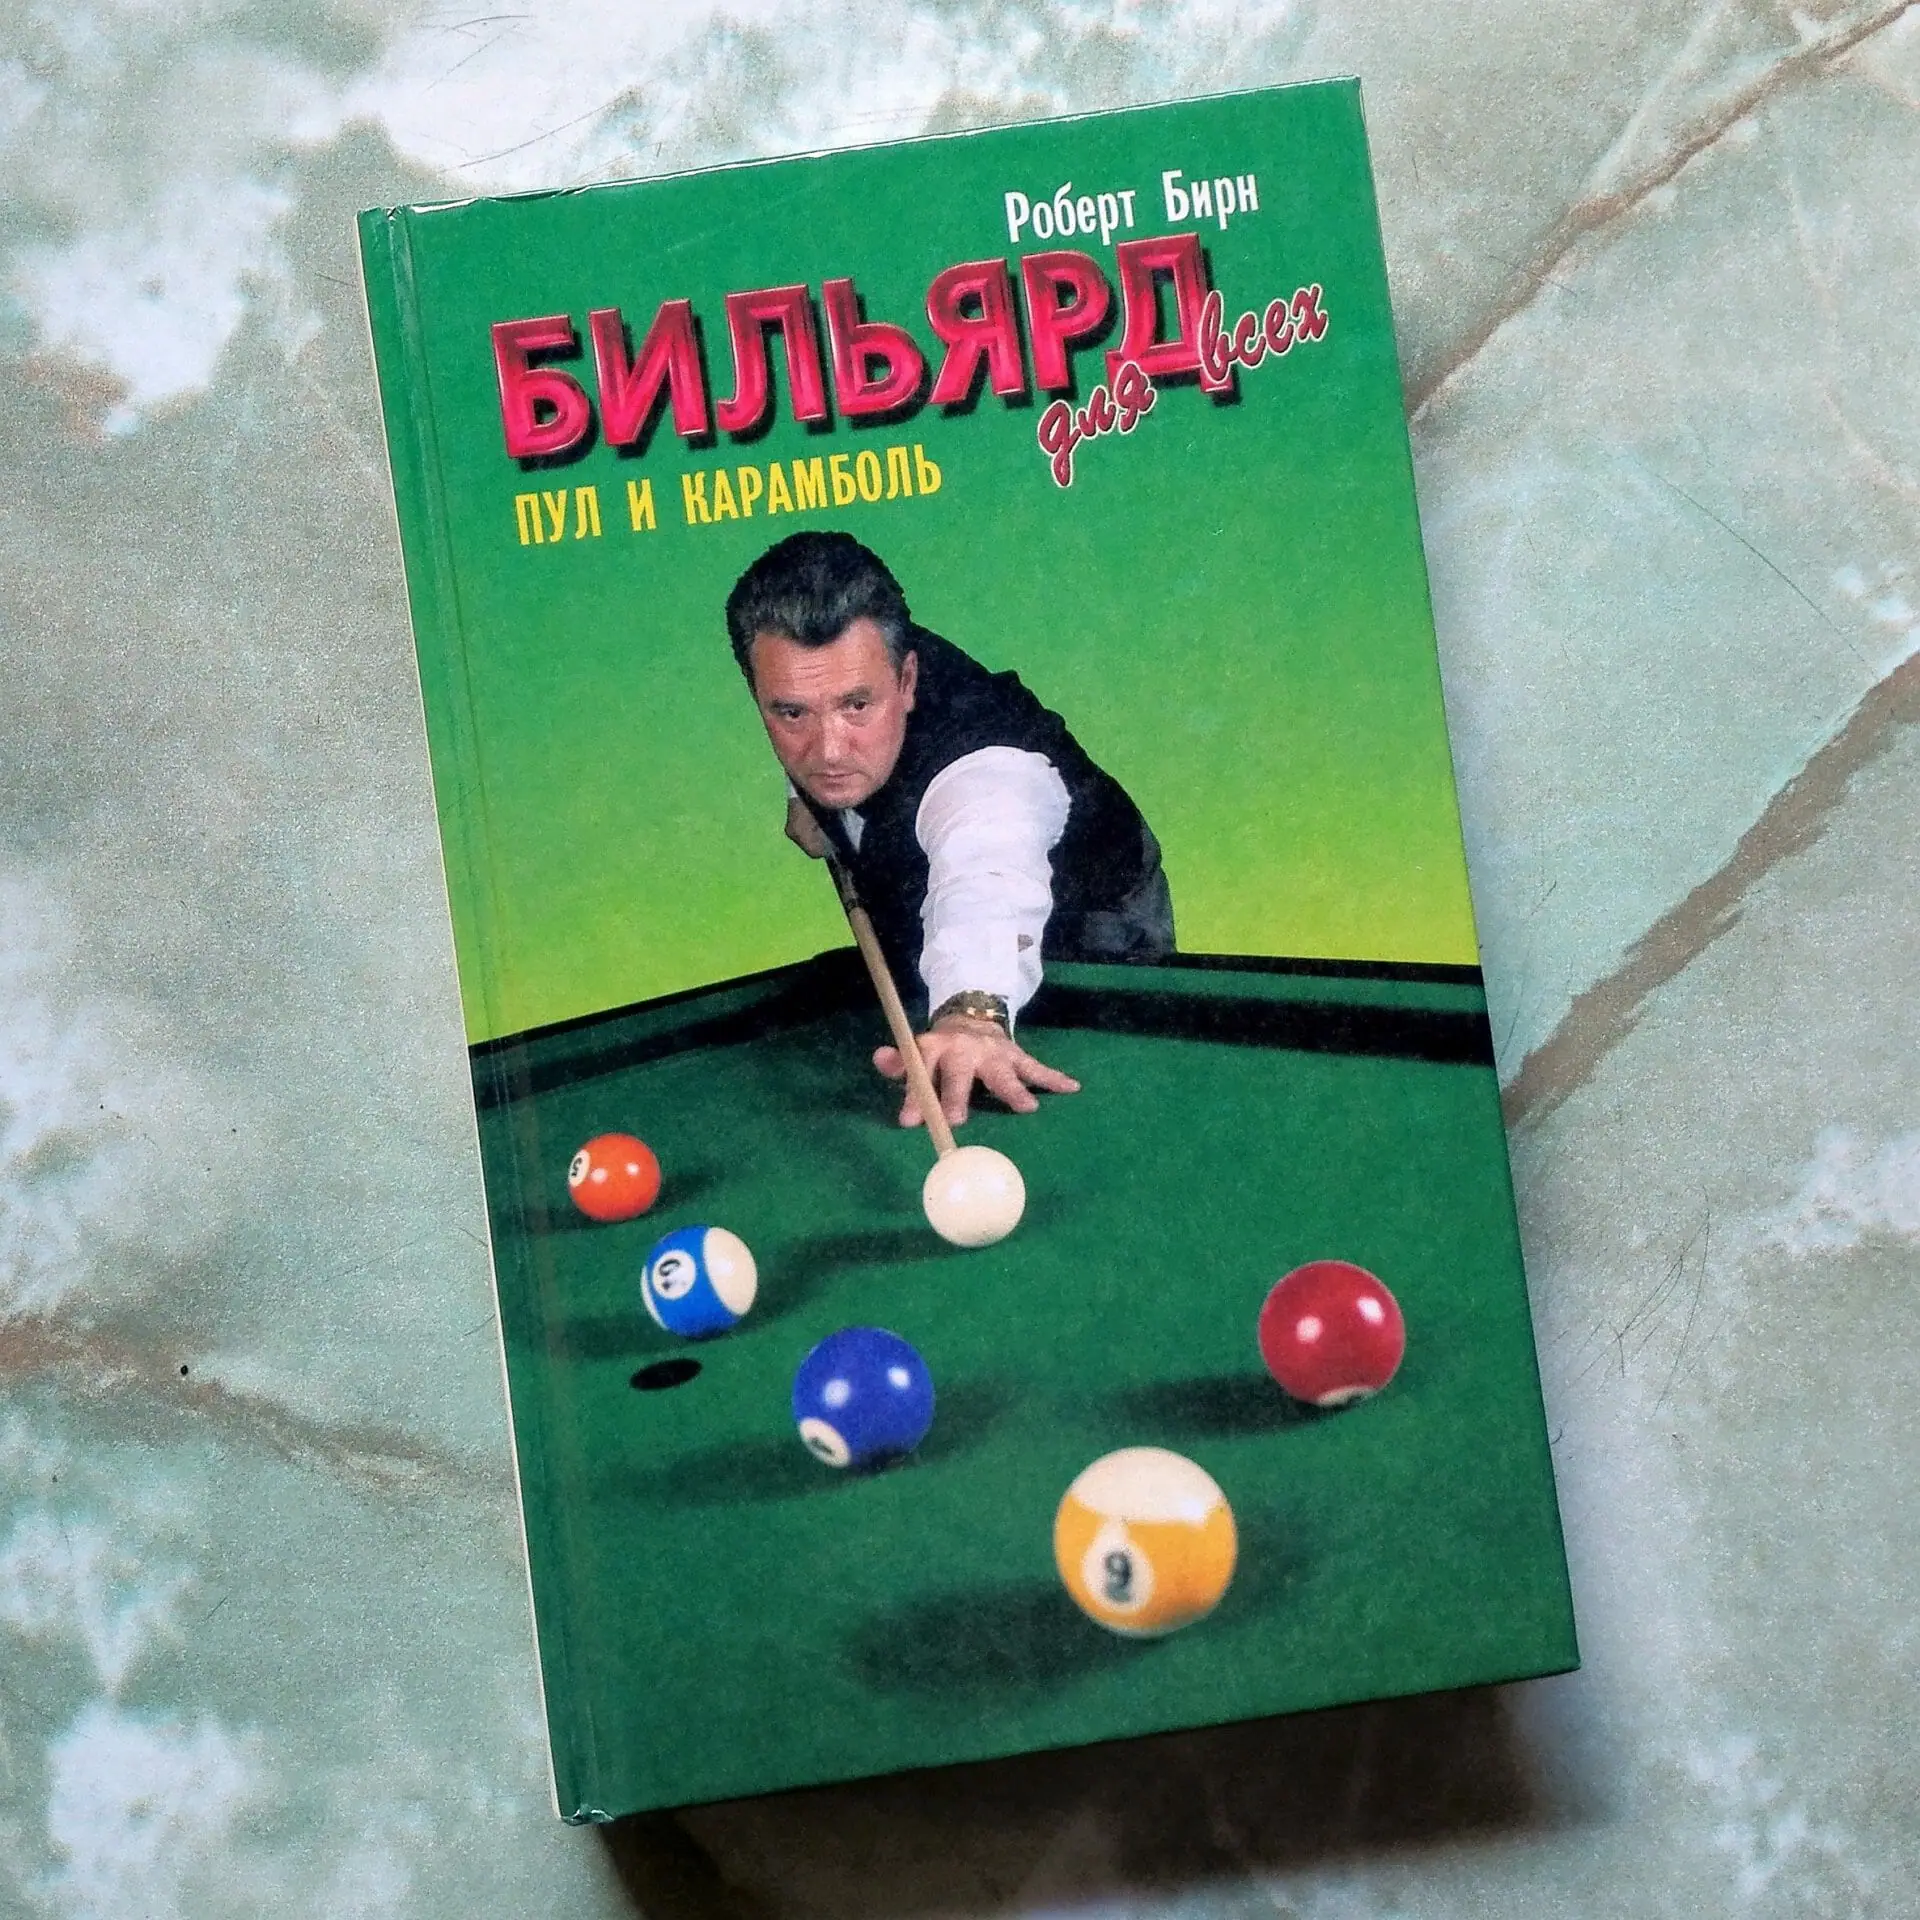 Vintage Book Billiards for all. Pool and Carom. Robert Byrne book